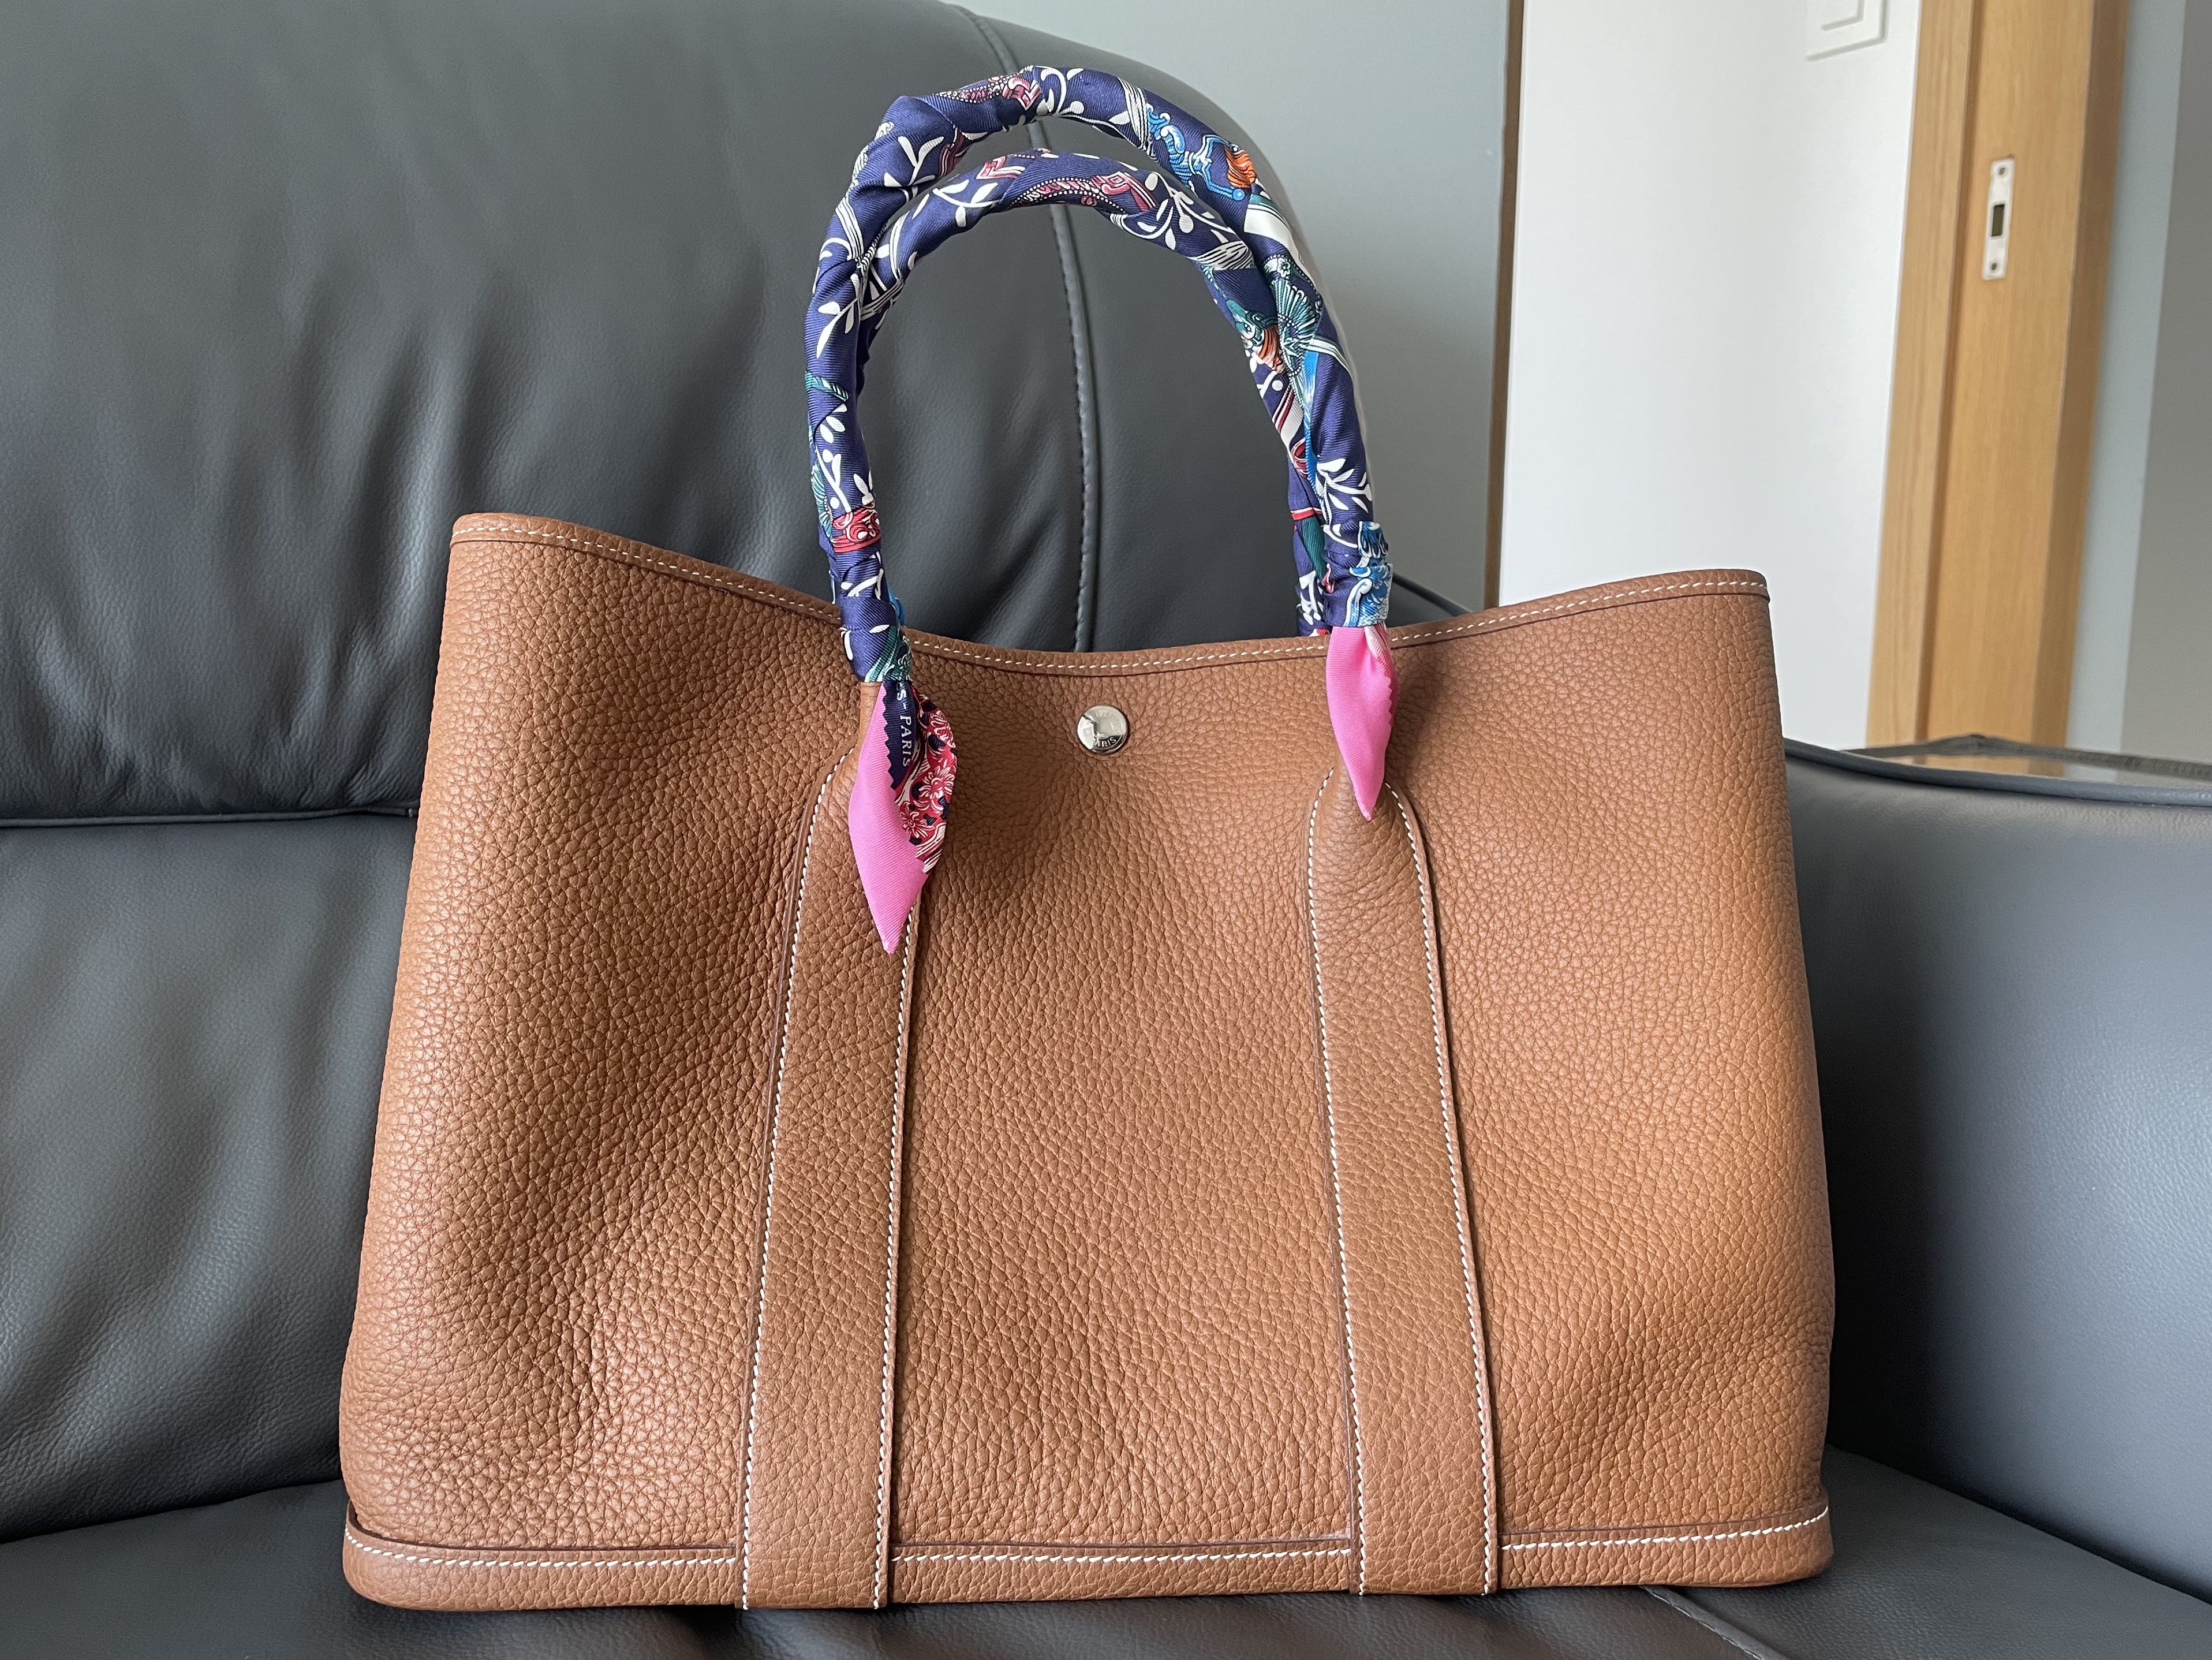 Hermes Garden Party Tote Review 